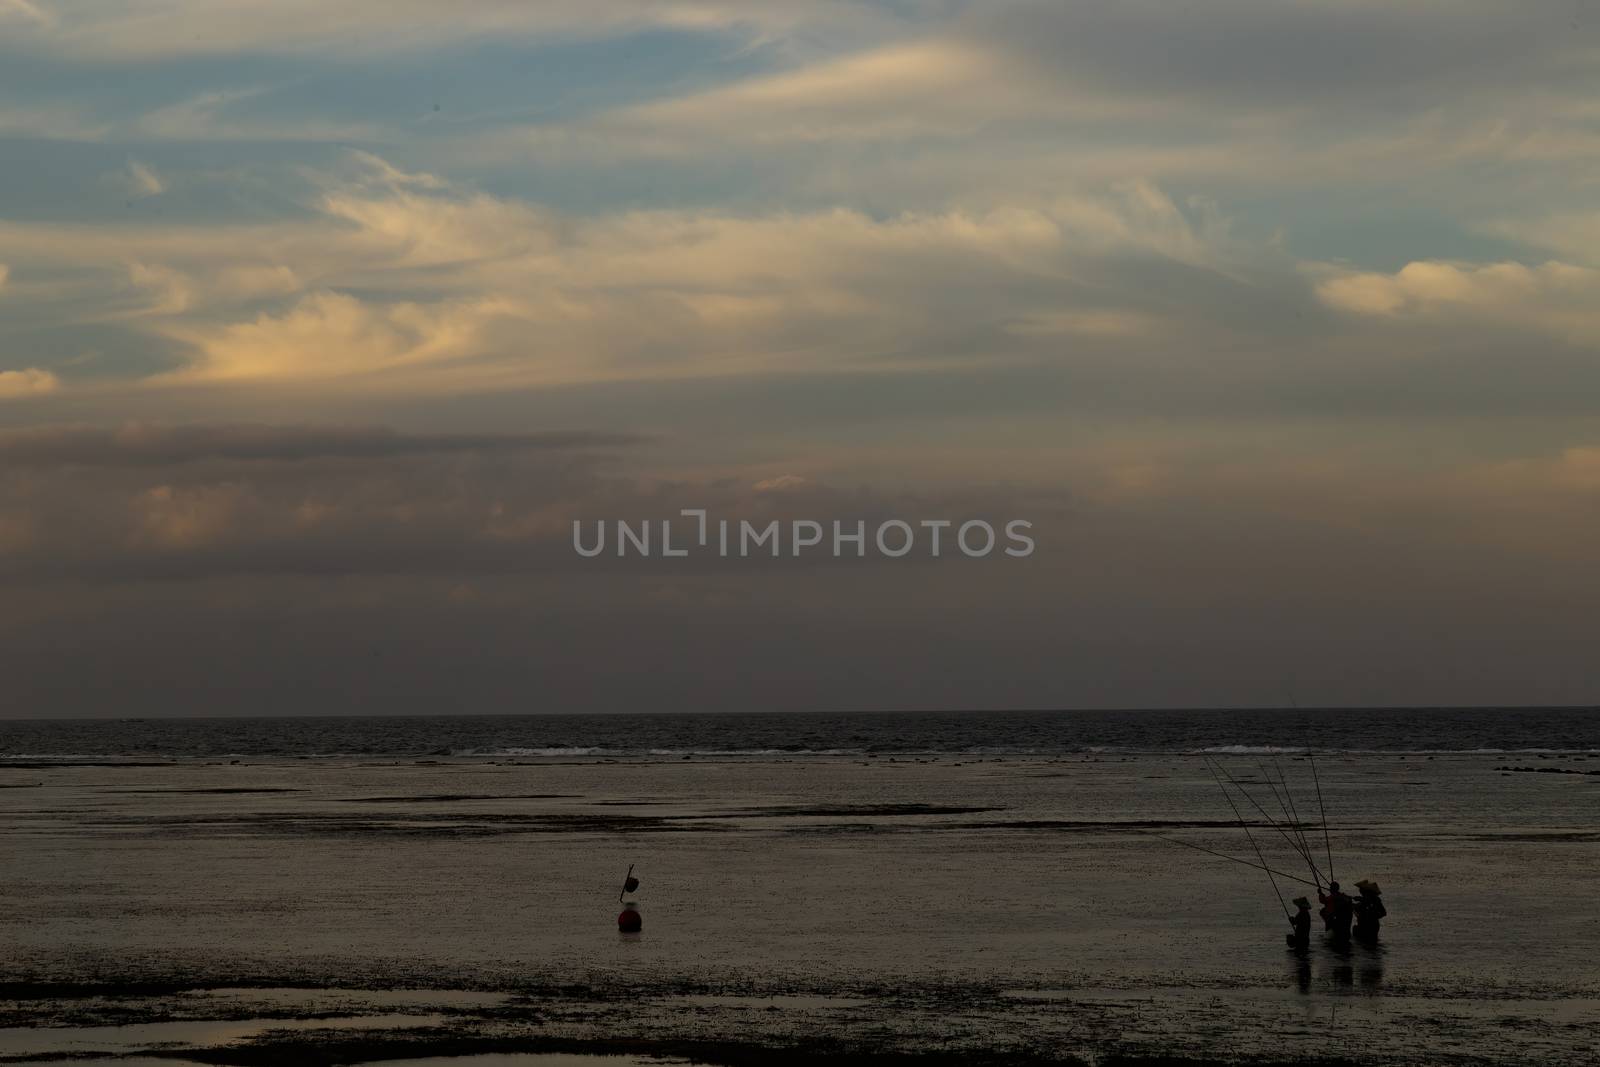 Bali, Indonesia - CIRCA 2018: Group of fisherman fishing for fish in ocean water during sun set with a beautiful colored cloudy sky. by dugulan